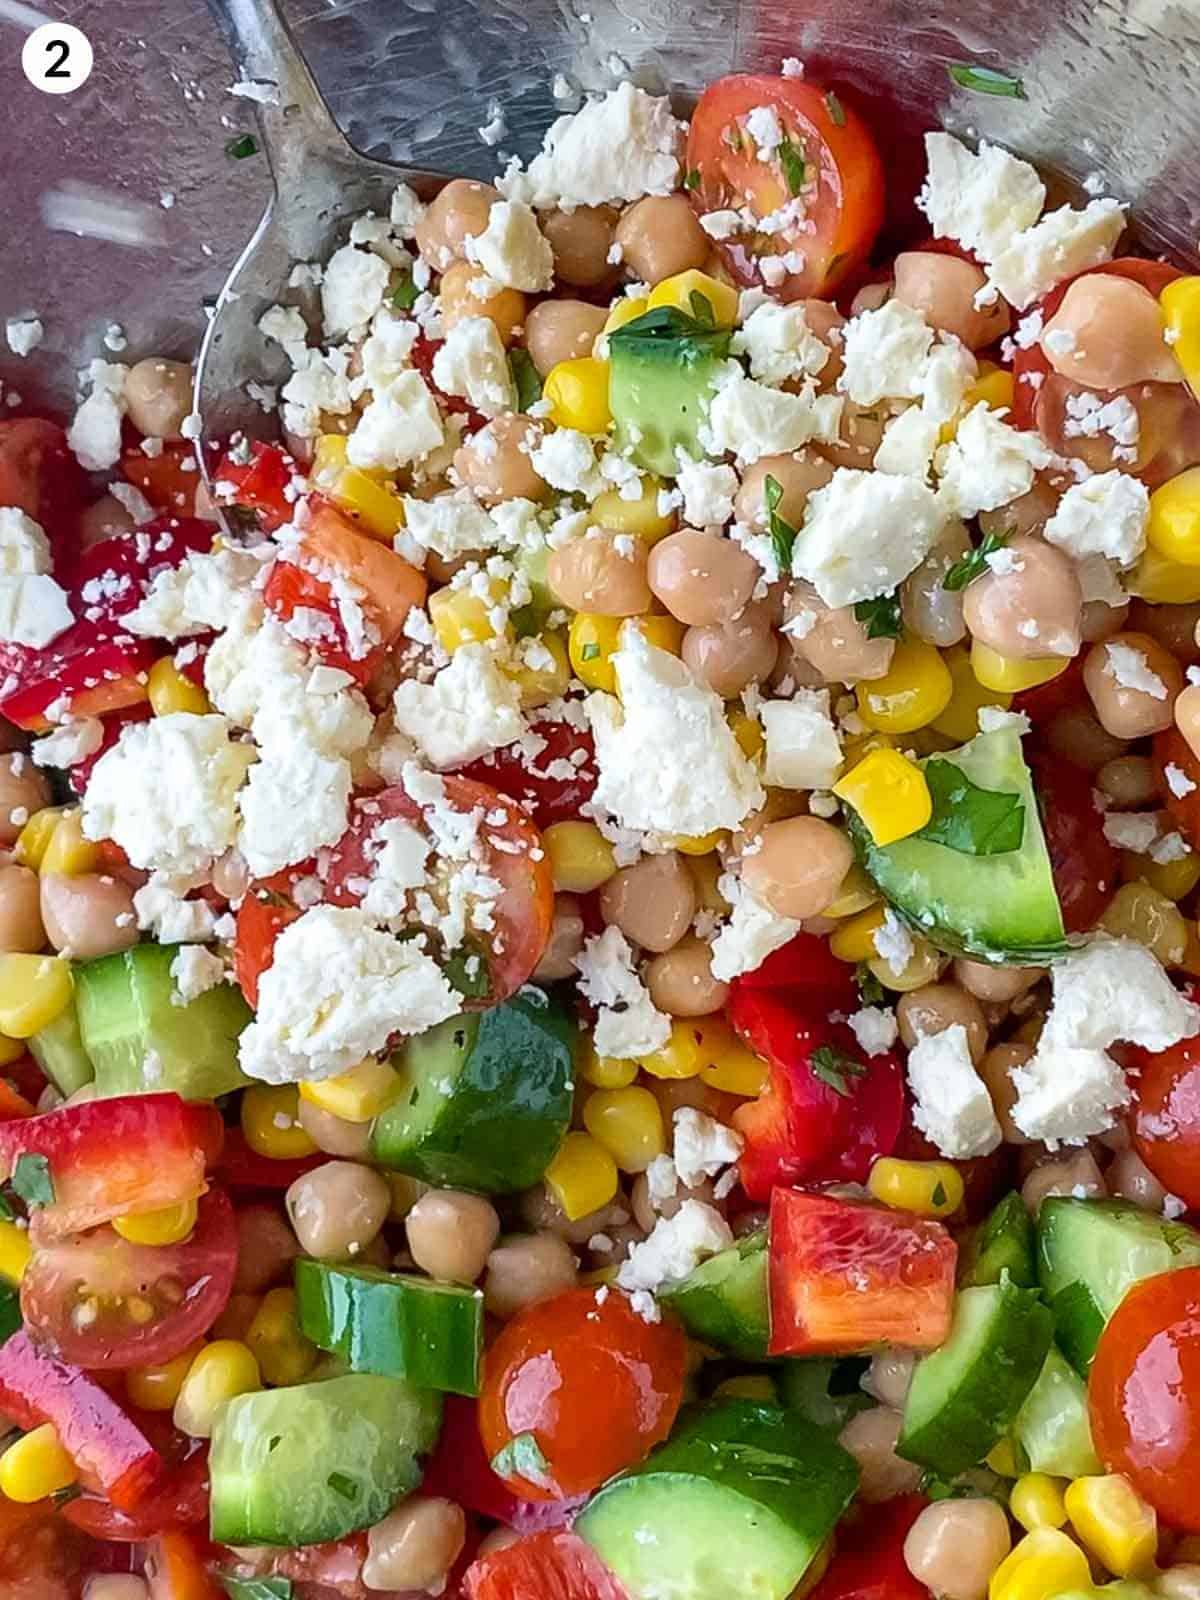 Mixing Chickpea Salad with Feta in a stainless steel bowl